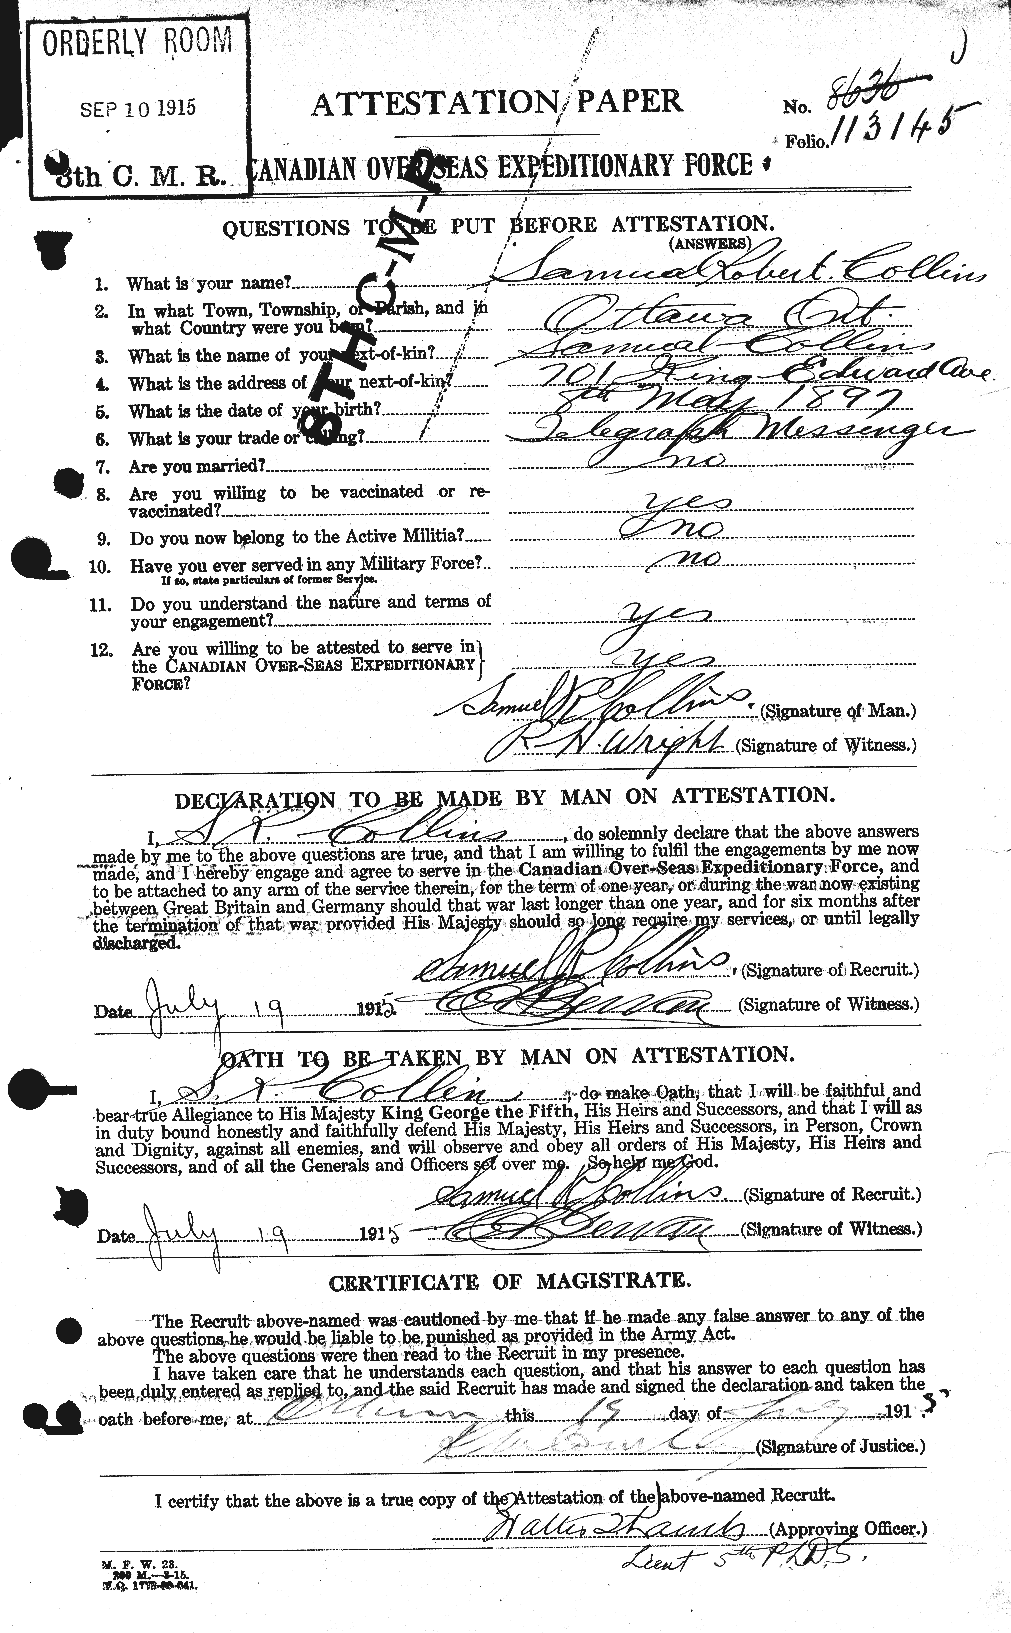 Personnel Records of the First World War - CEF 069159a